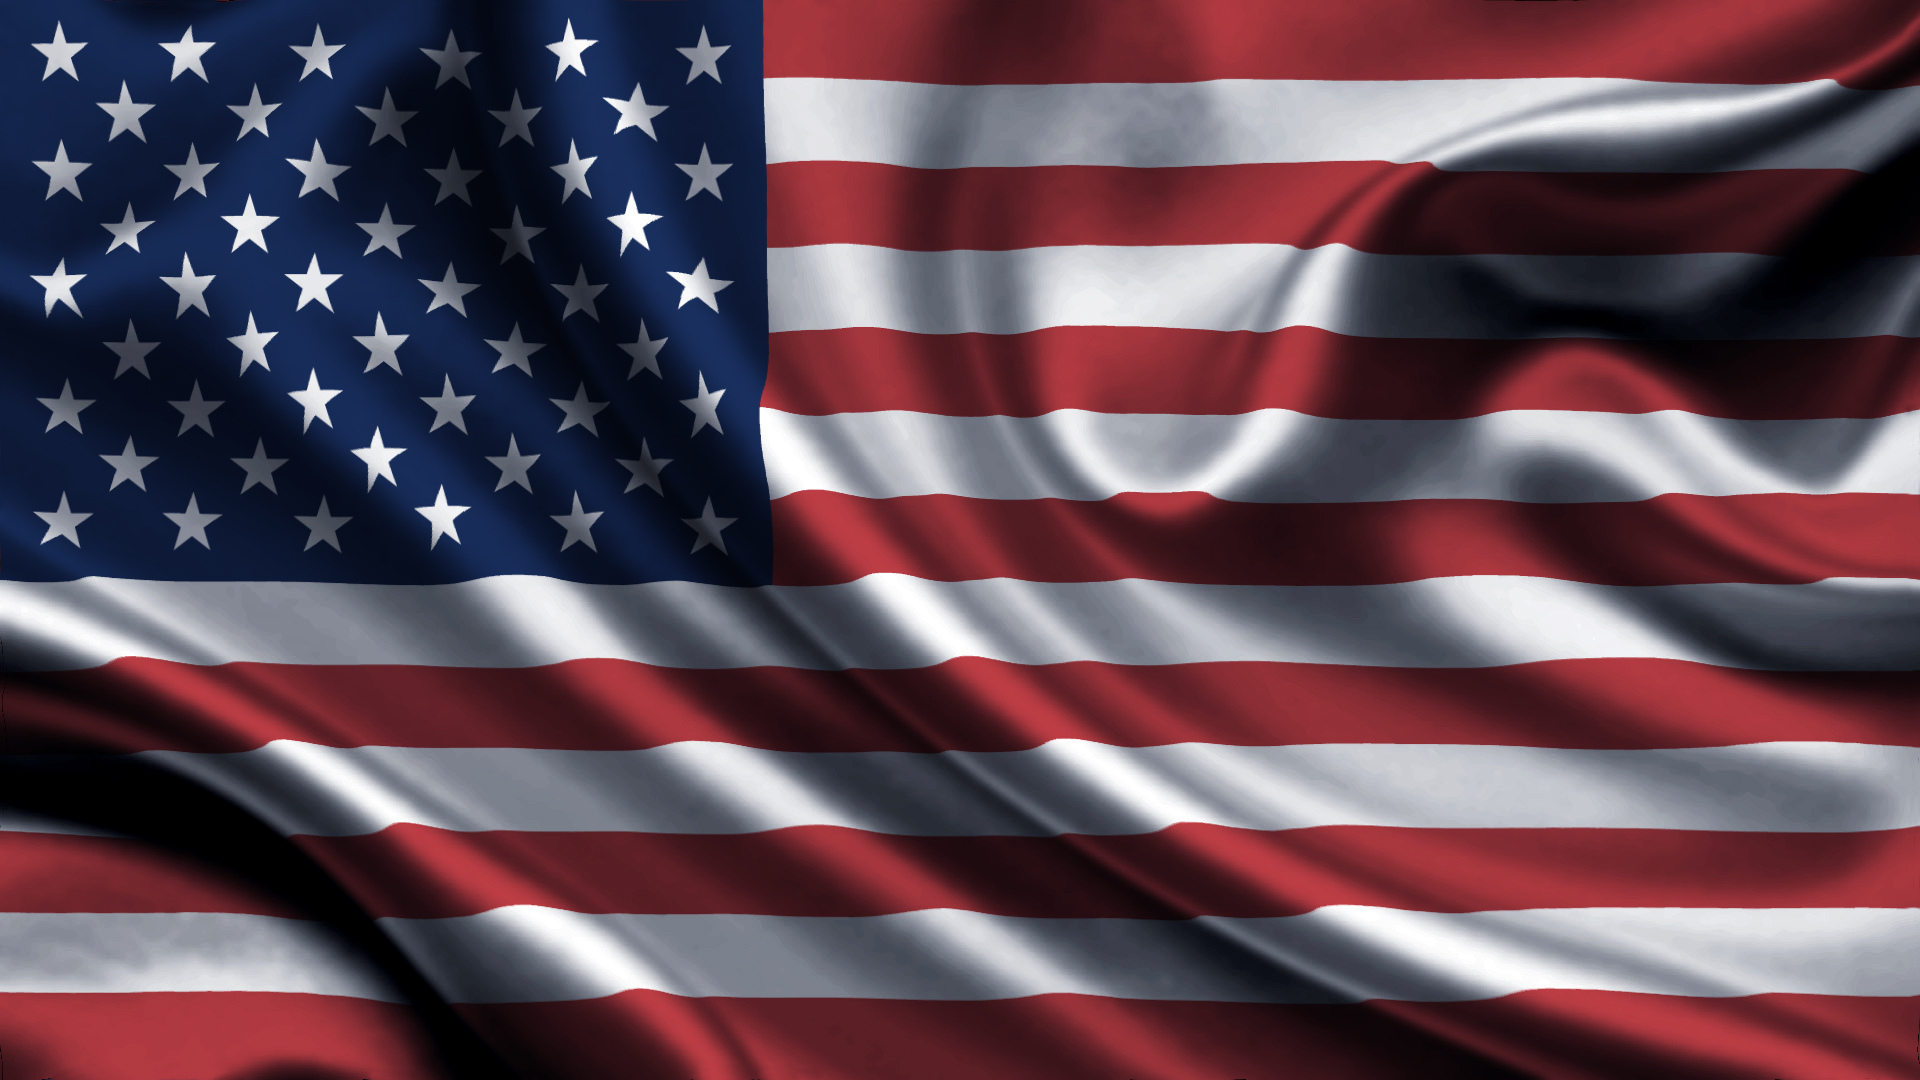 United States flag wallpaper 1920x1080 47362 WallpaperUP